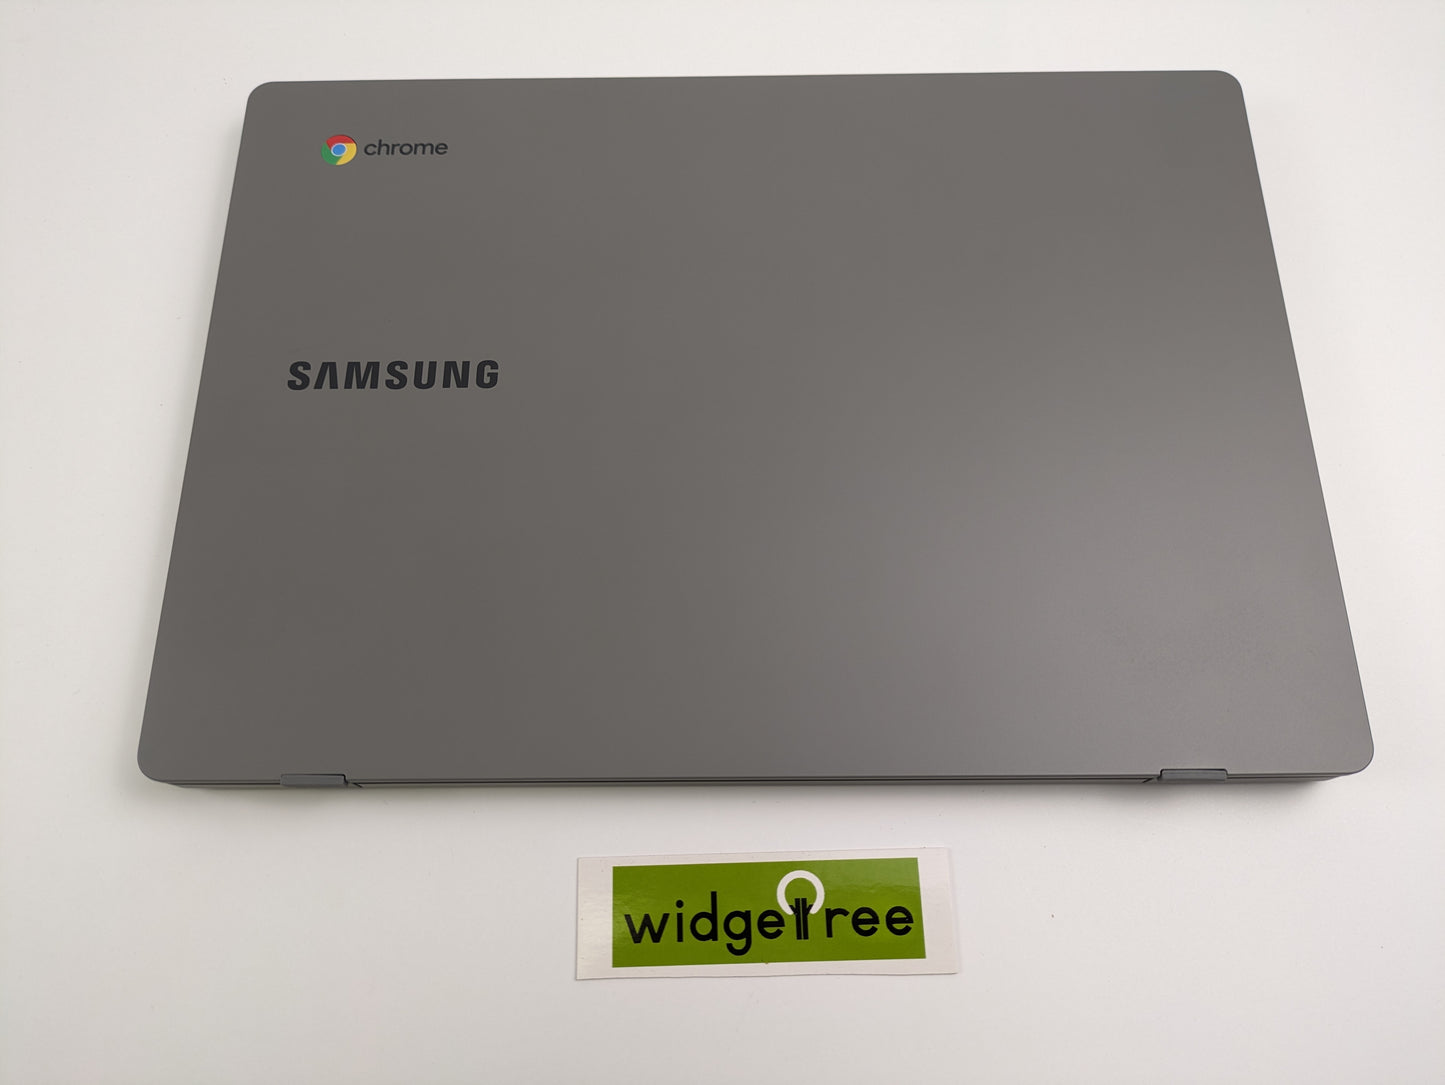 Samsung Chromebook 4 11.6" 4GB 16GB SSD Laptop - XE310XBA-KB1US Reconditioned